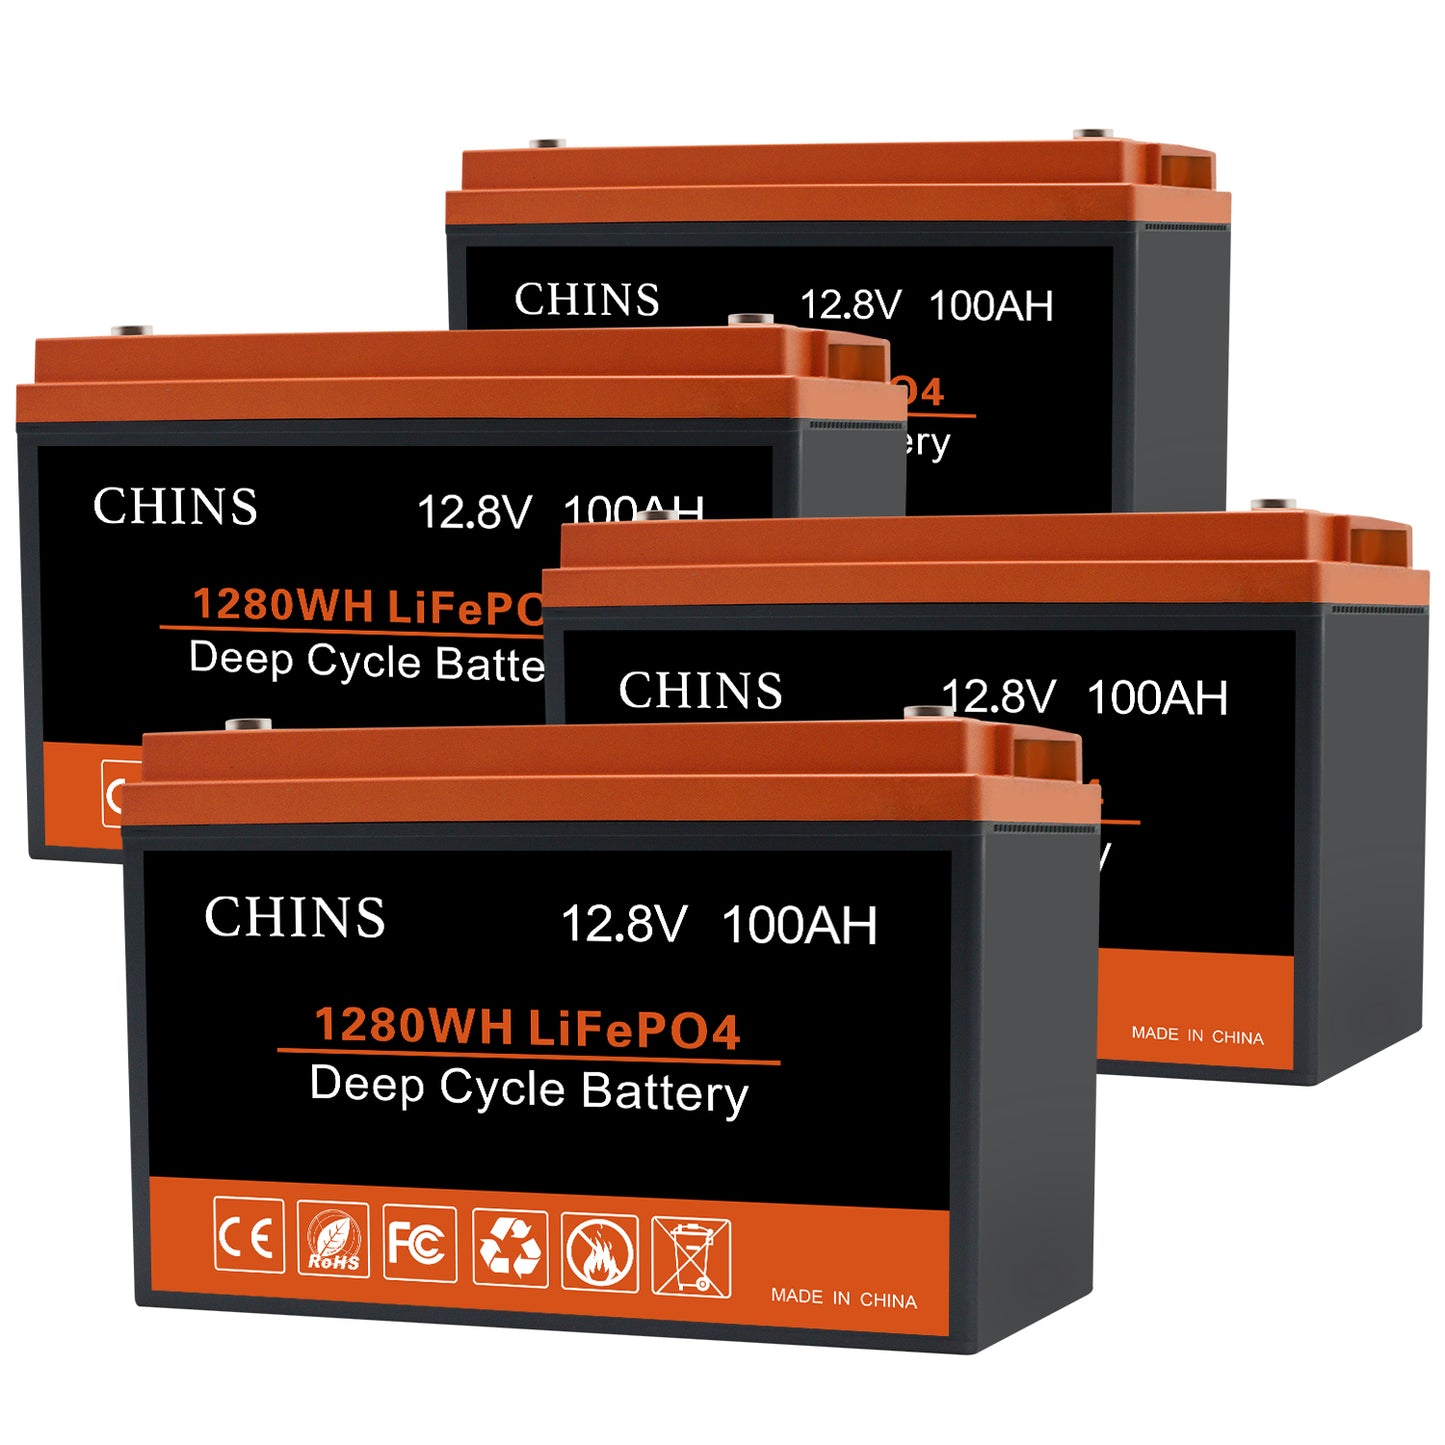 CHINS 12V 100AH Lifepo4 Battery,Support Low-temperature cut-off function,Perfect for Golf Cart, Trolling Motor, Marine(4PCS)